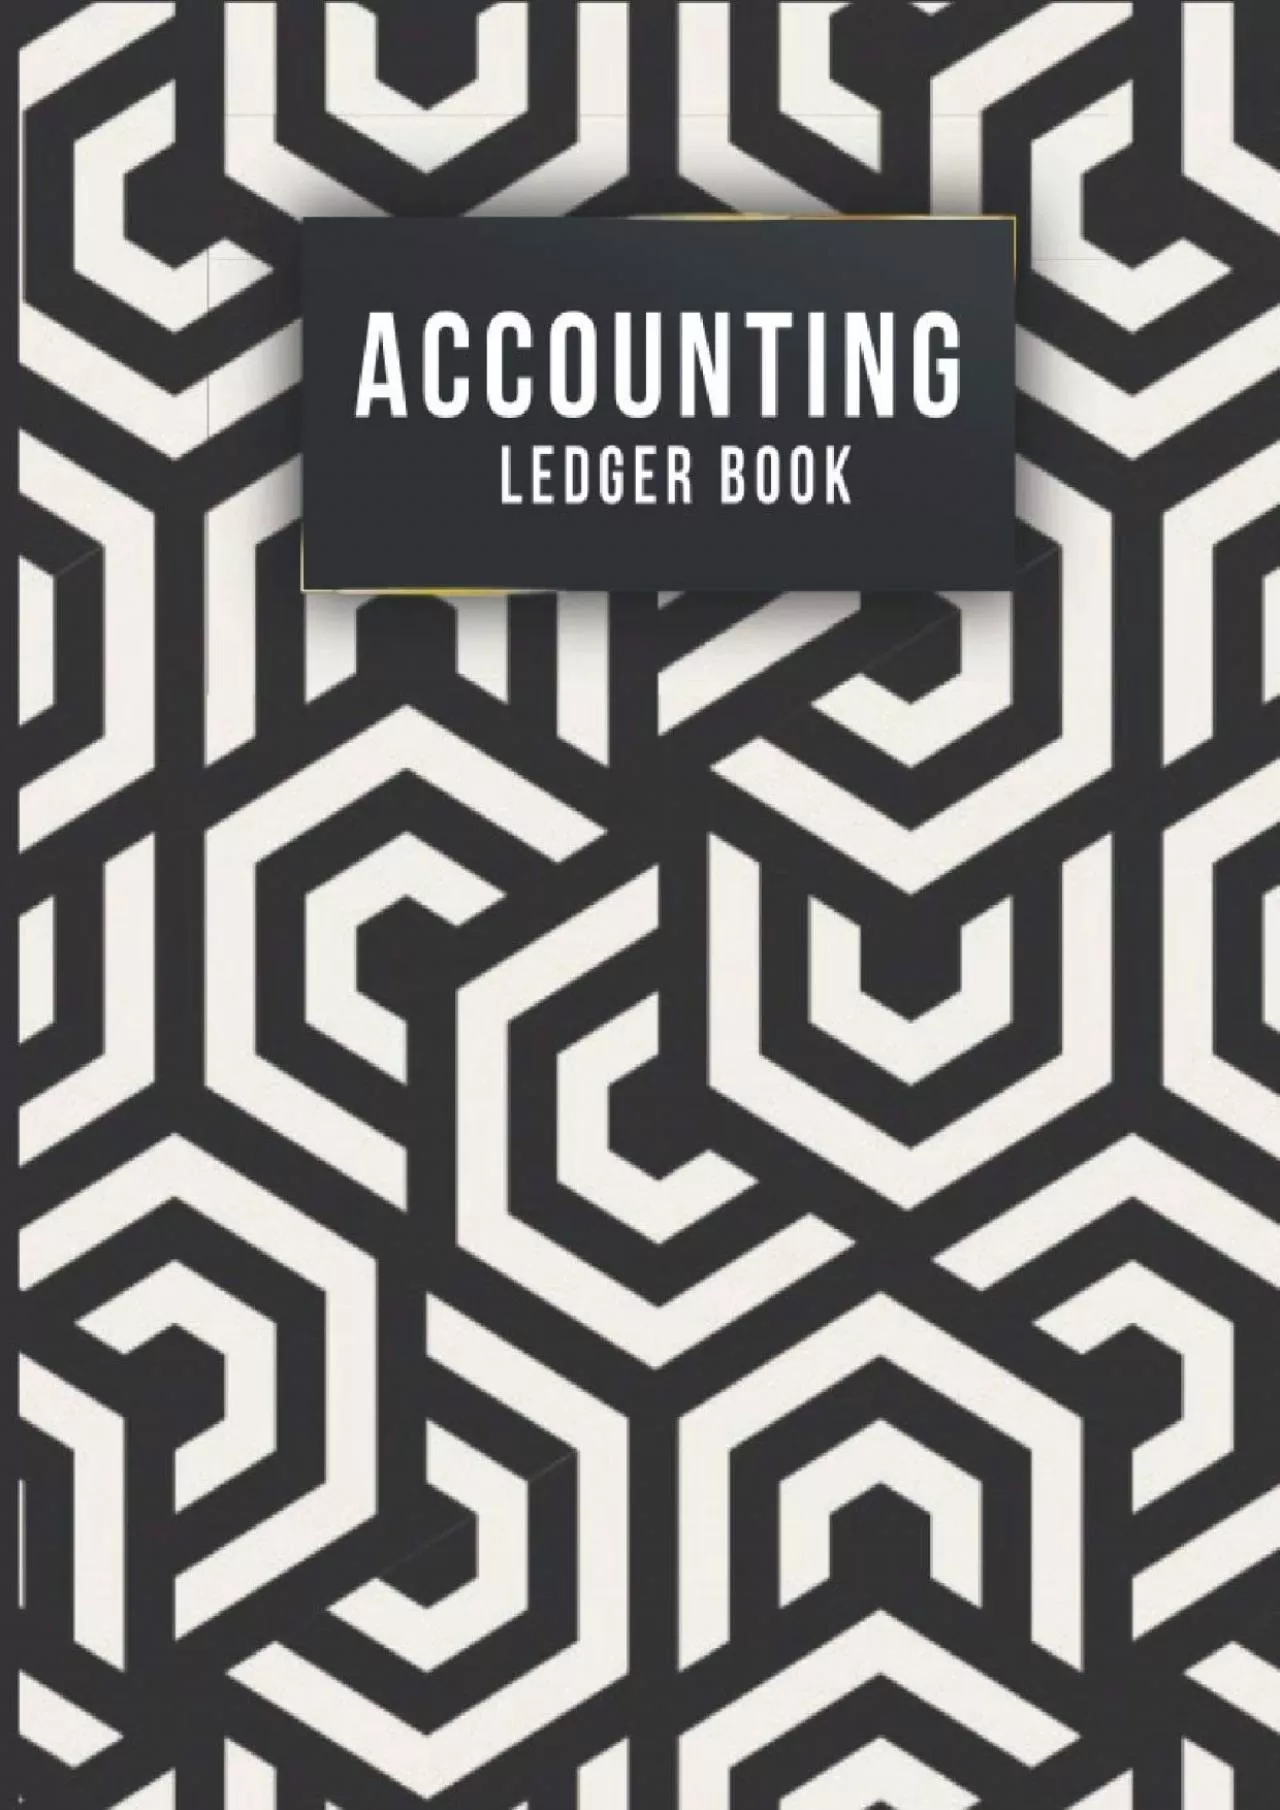 Accounting Ledger Book: General Business Ledger Checking Account Ledger Book For Bookkeeping